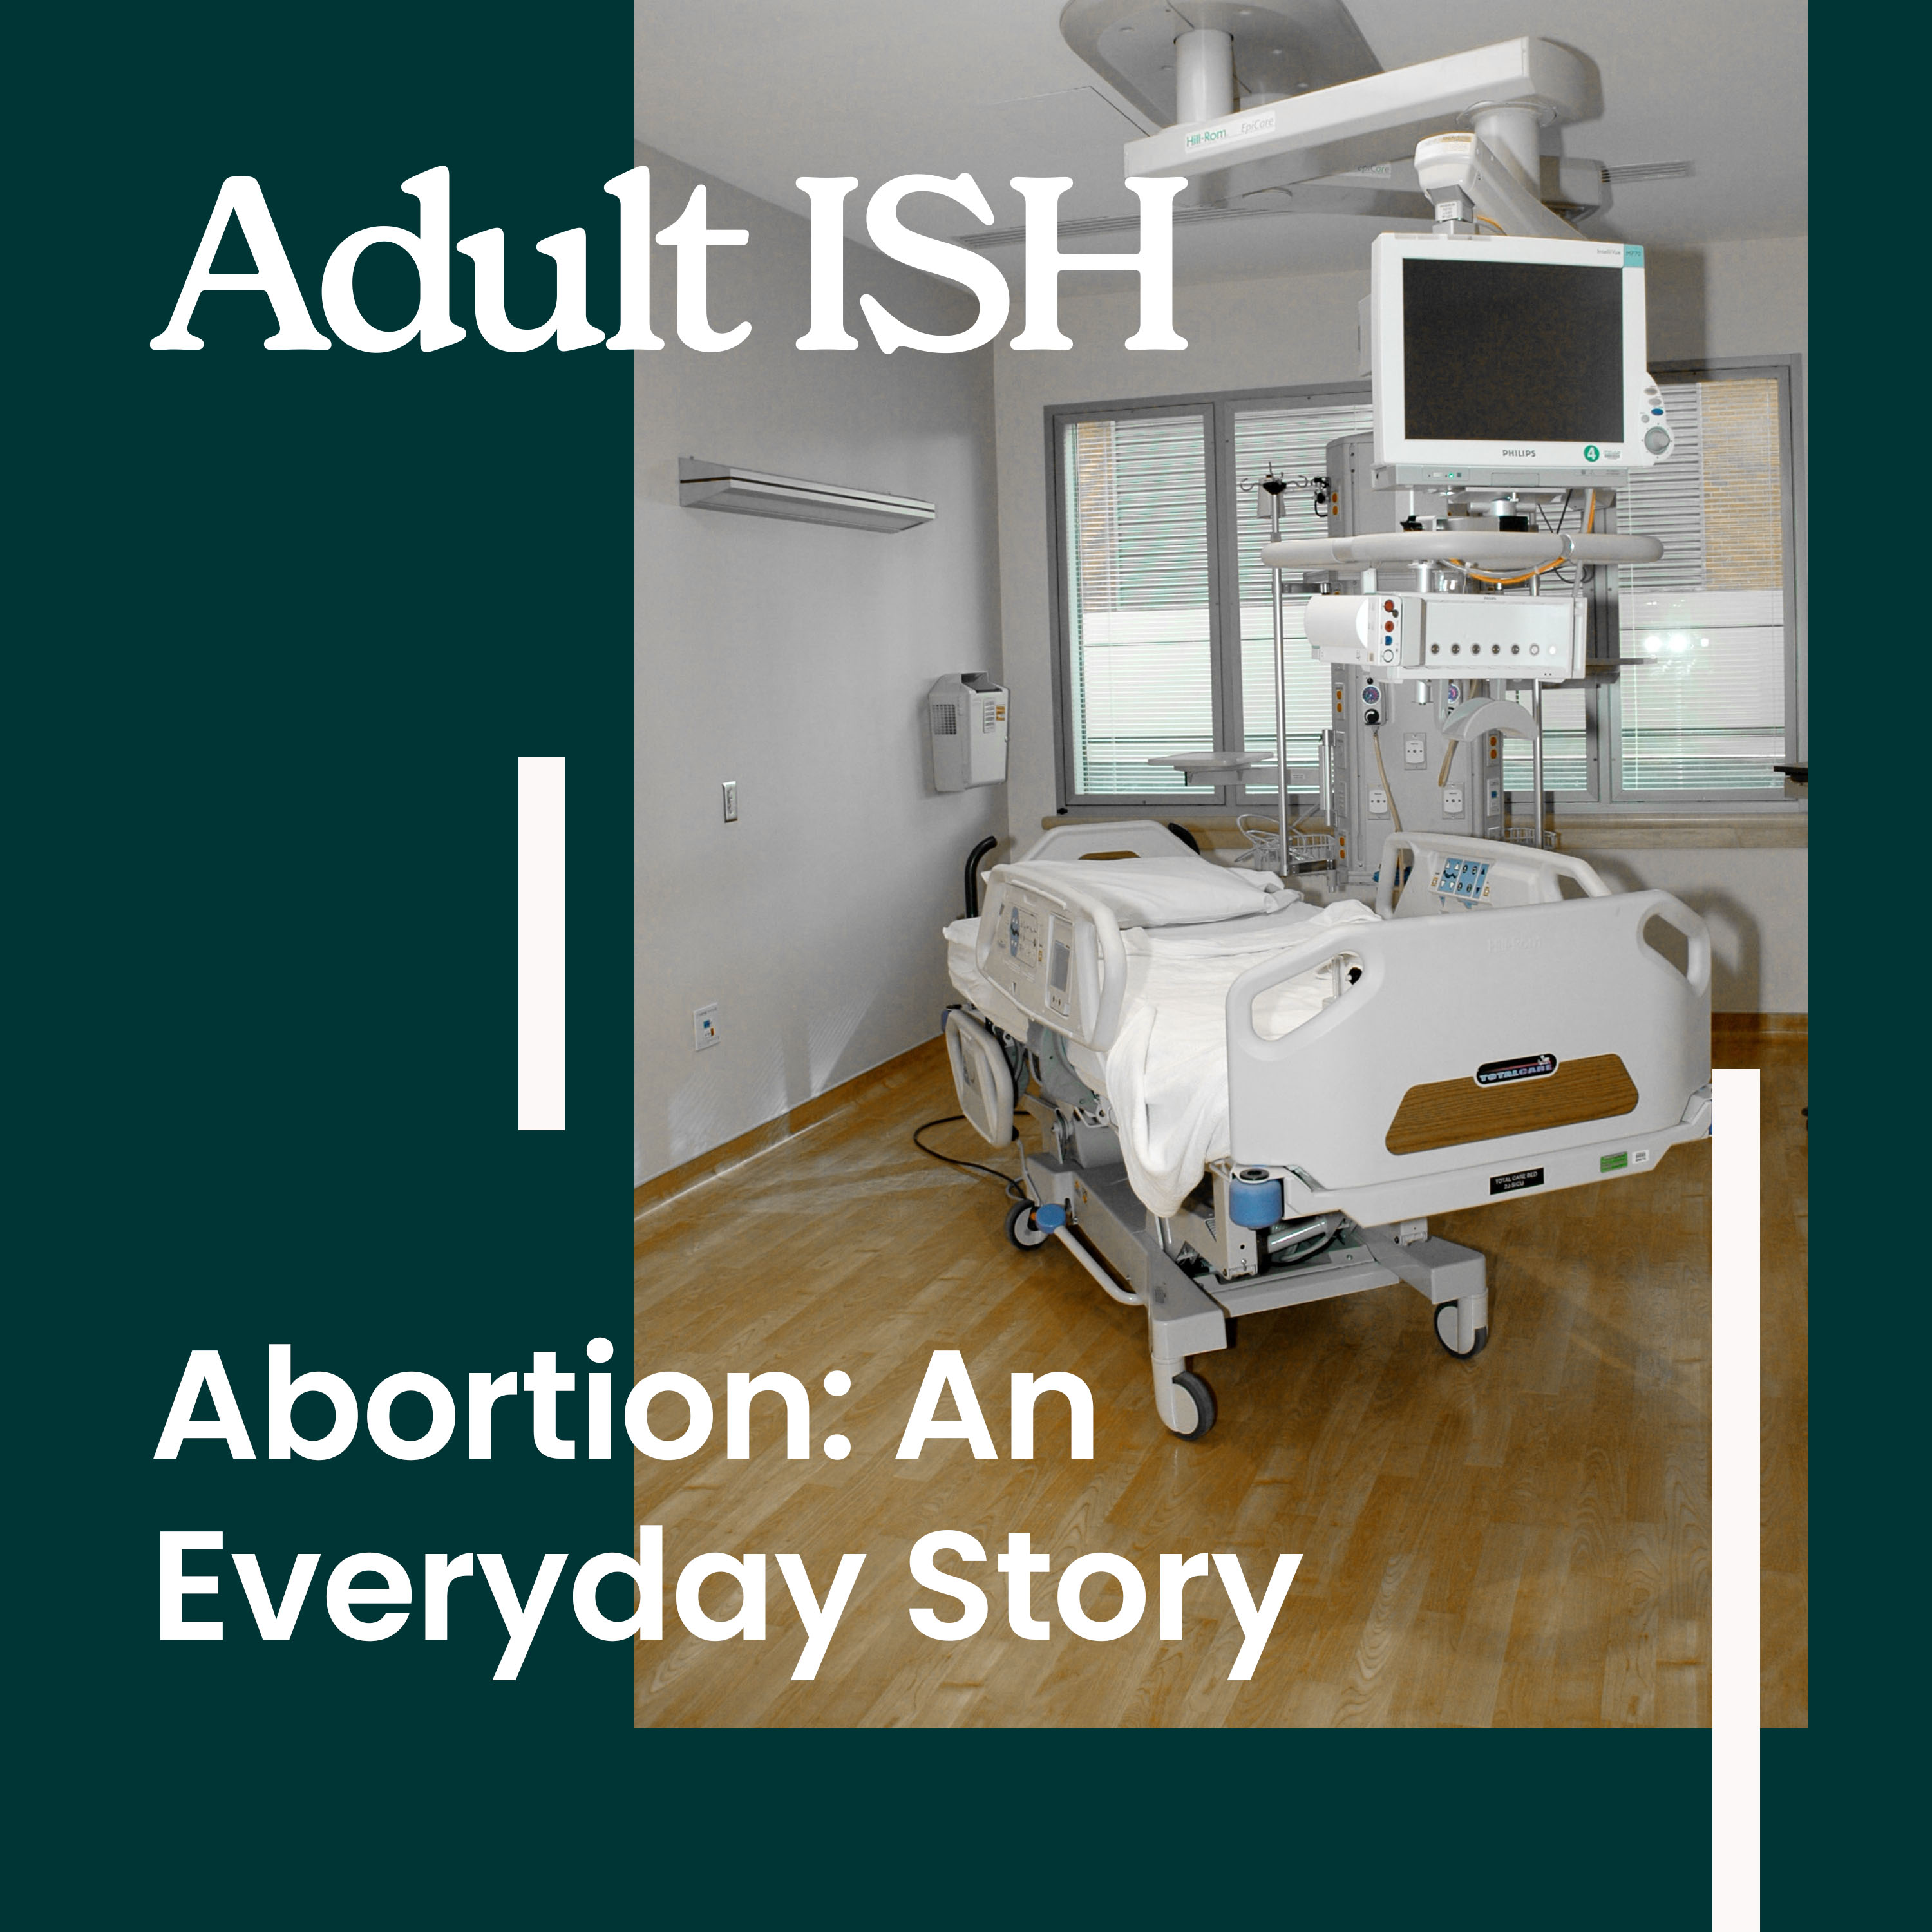 Abortion: An Everyday Story